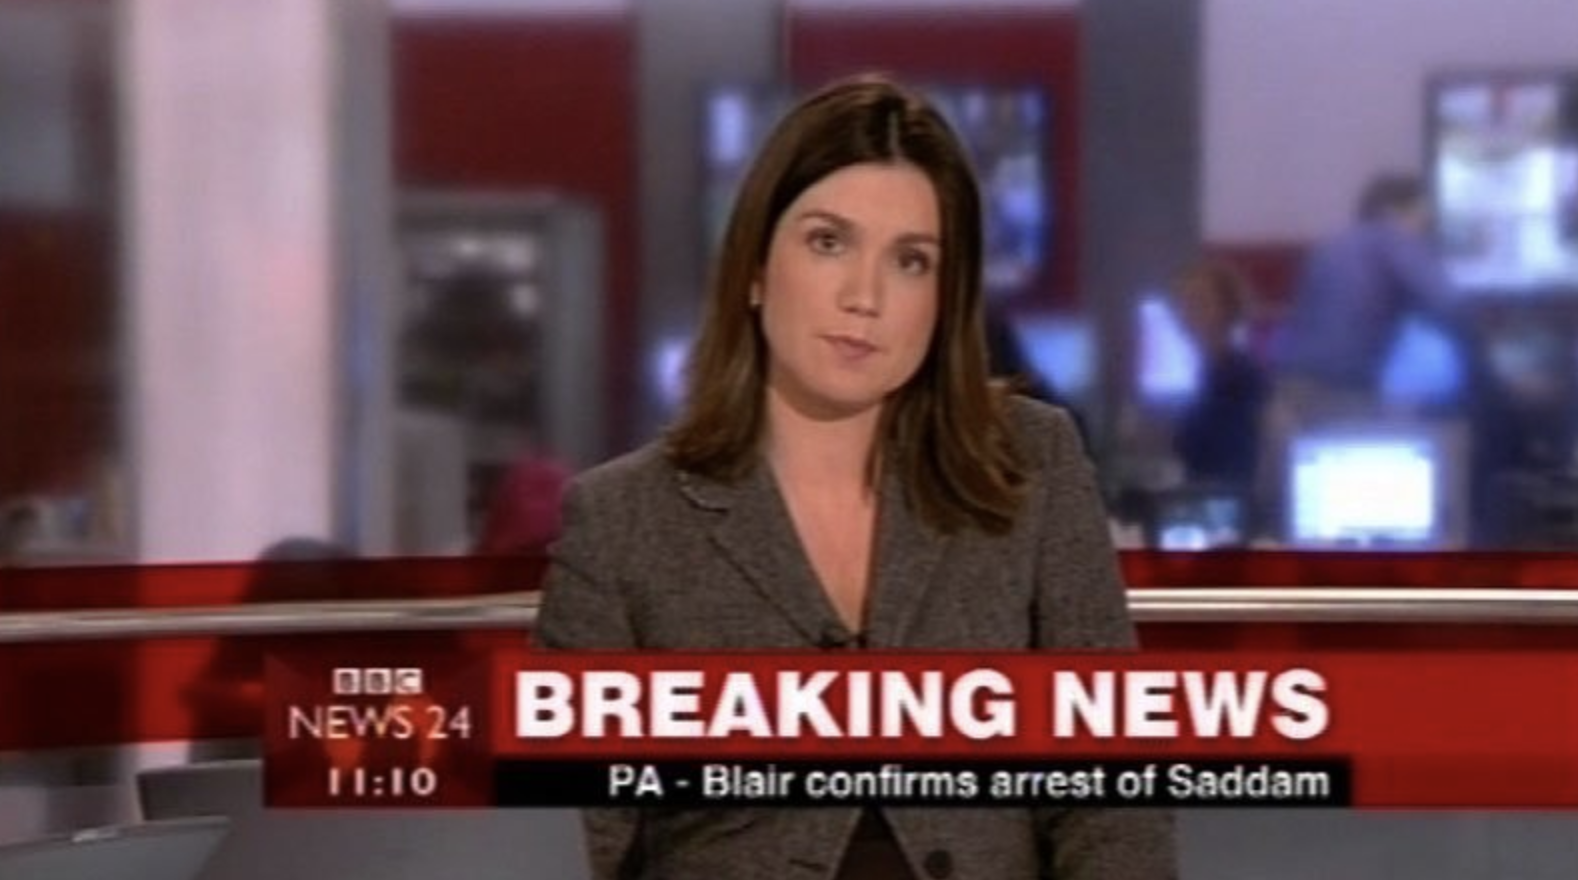 Susanna Reid previously worked for the BBC.